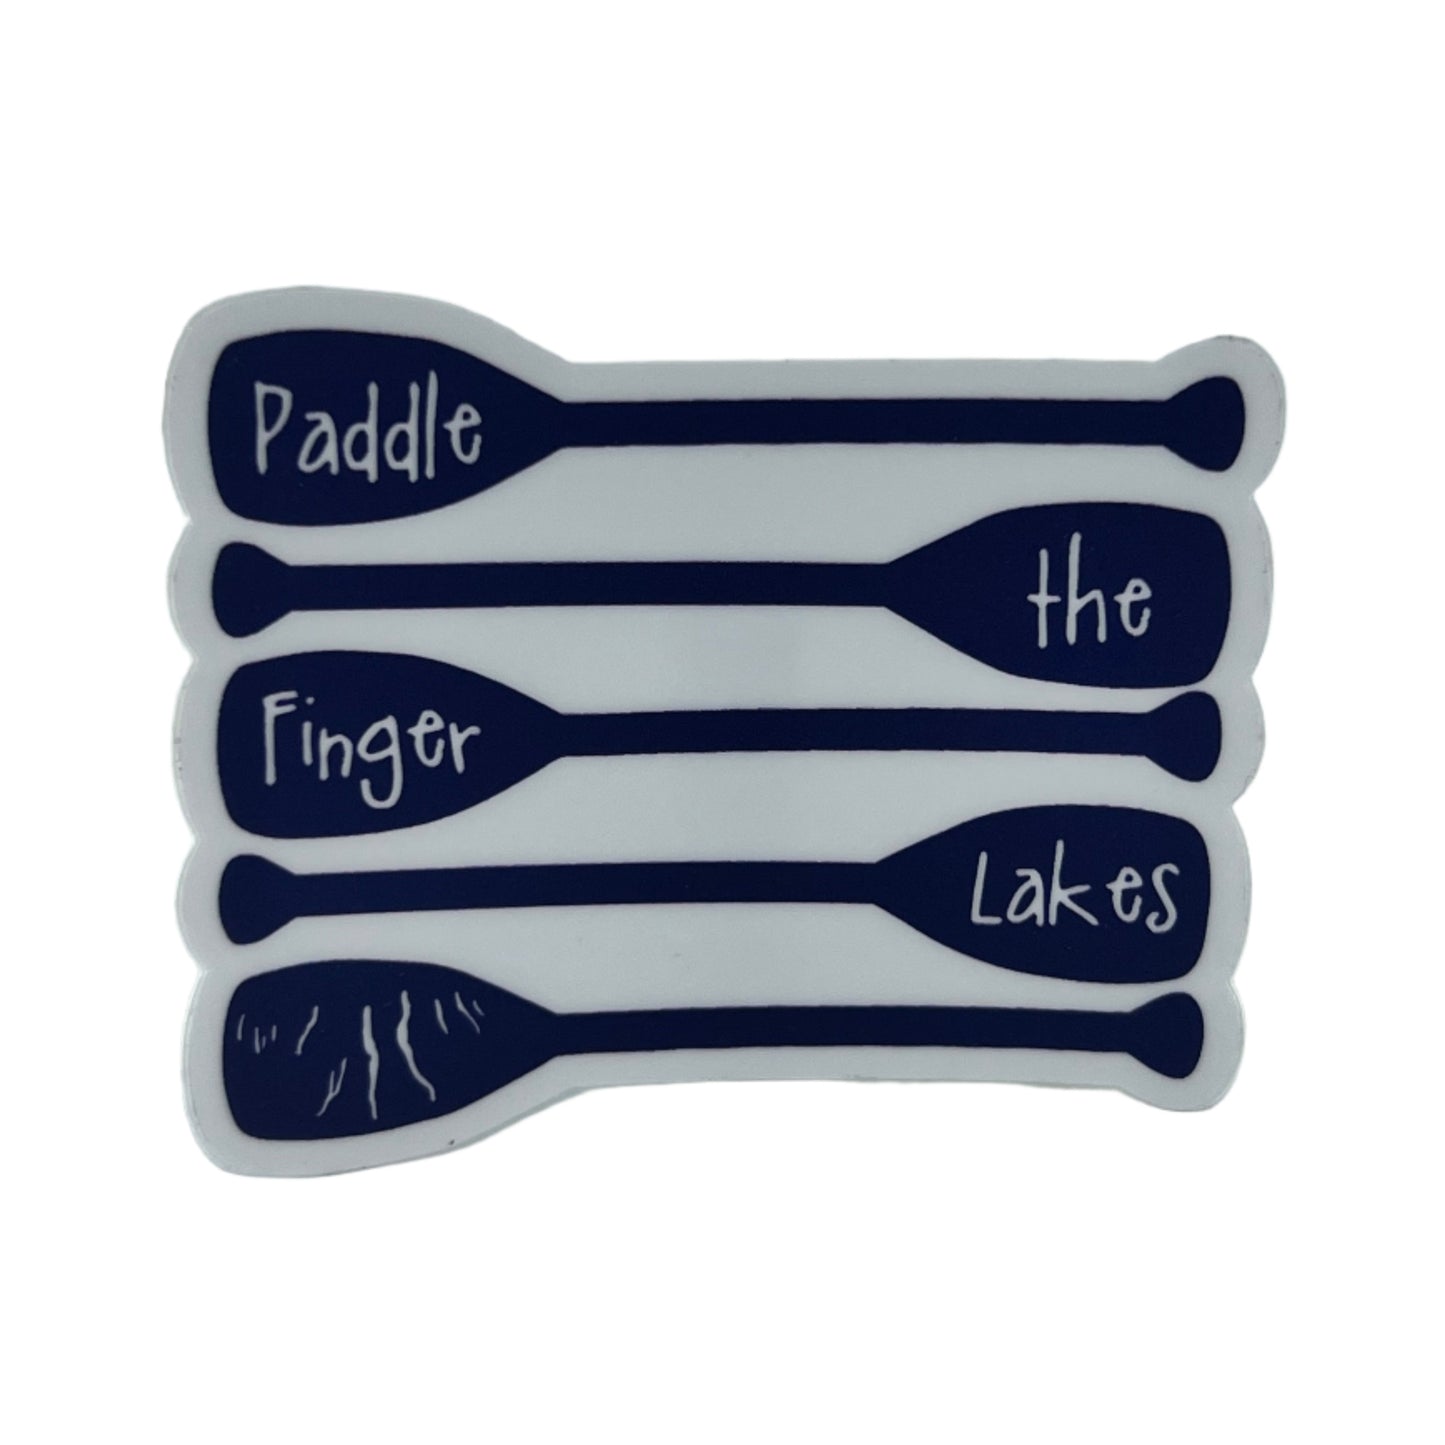 Paddle the Finger Lakes 3" Sticker